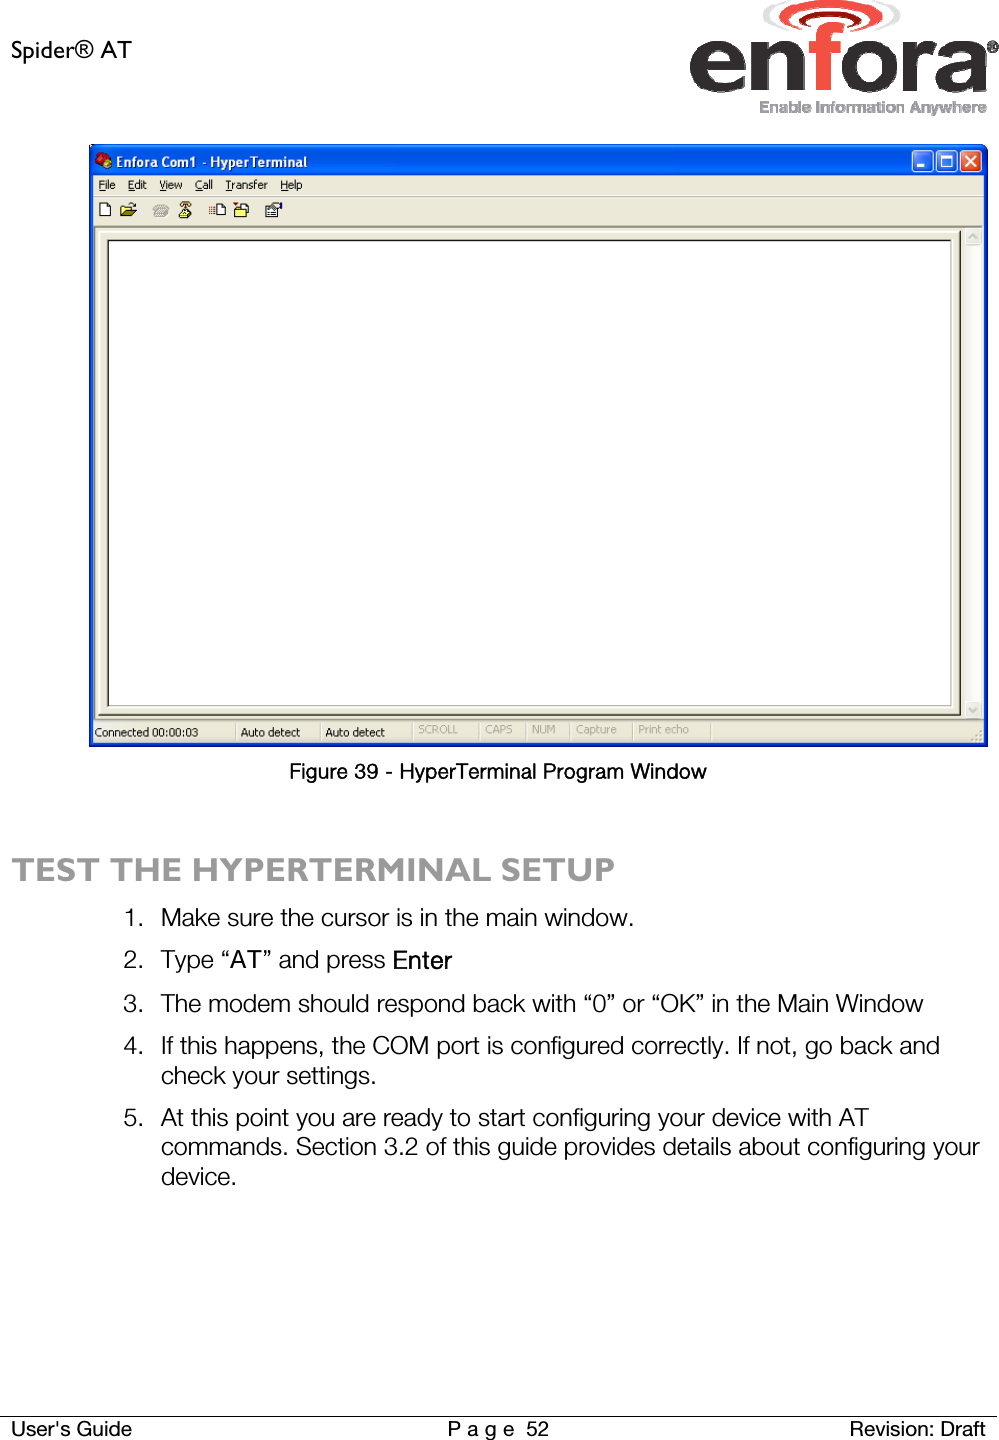 Spider® AT     User&apos;s Guide  P a g e 52 Revision: Draft  Figure 39 - HyperTerminal Program Window  TEST THE HYPERTERMINAL SETUP 1. Make sure the cursor is in the main window. 2. Type “AT” and press Enter 3. The modem should respond back with “0” or “OK” in the Main Window 4. If this happens, the COM port is configured correctly. If not, go back and check your settings. 5. At this point you are ready to start configuring your device with AT commands. Section 3.2 of this guide provides details about configuring your device.    